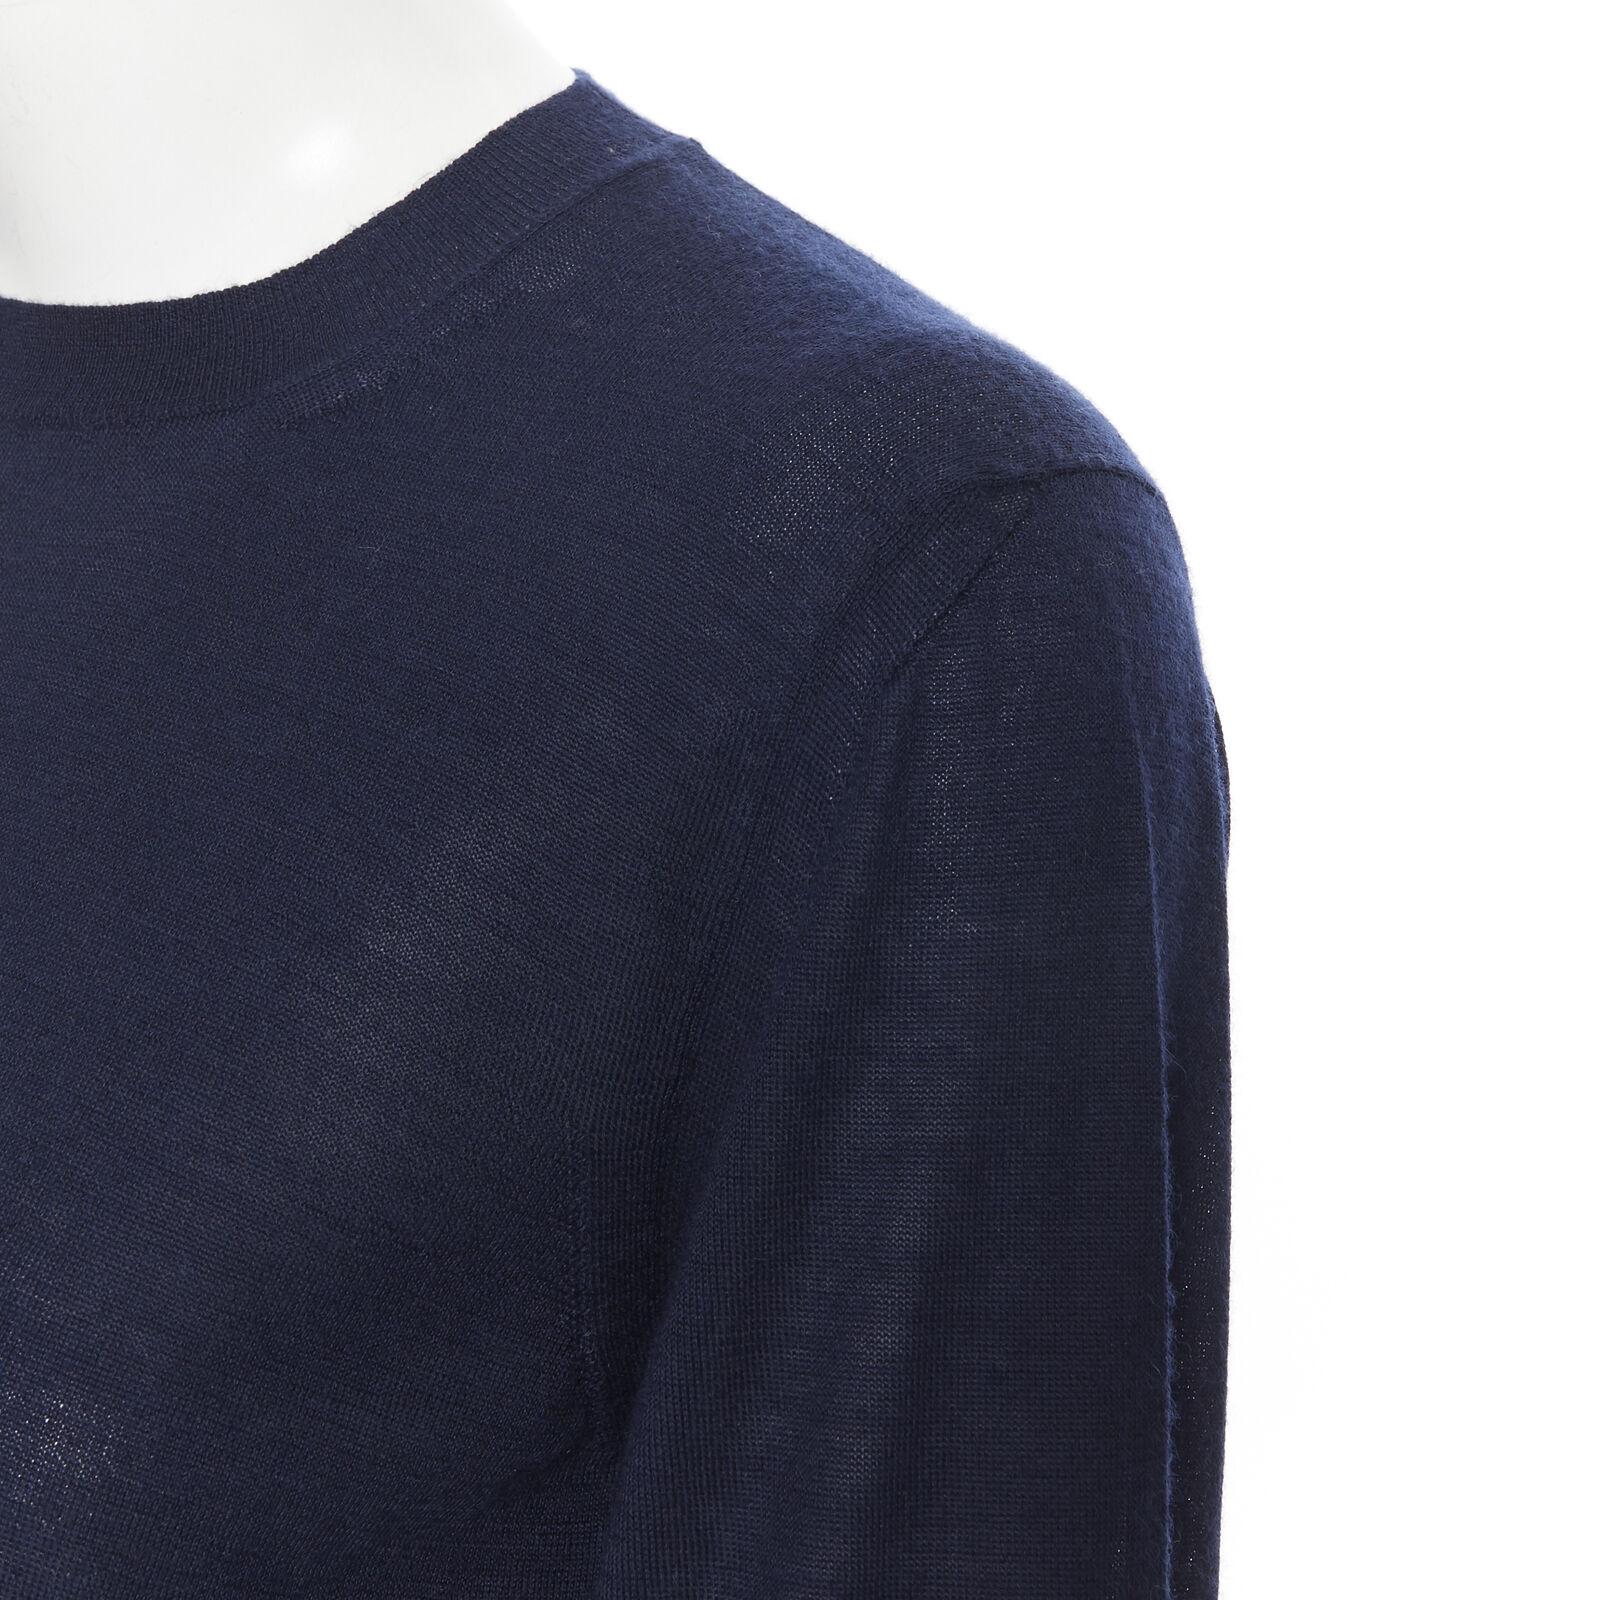 MARNI navy blue cashmere dual front slit pocket long sleeve sweater IT40 S 4